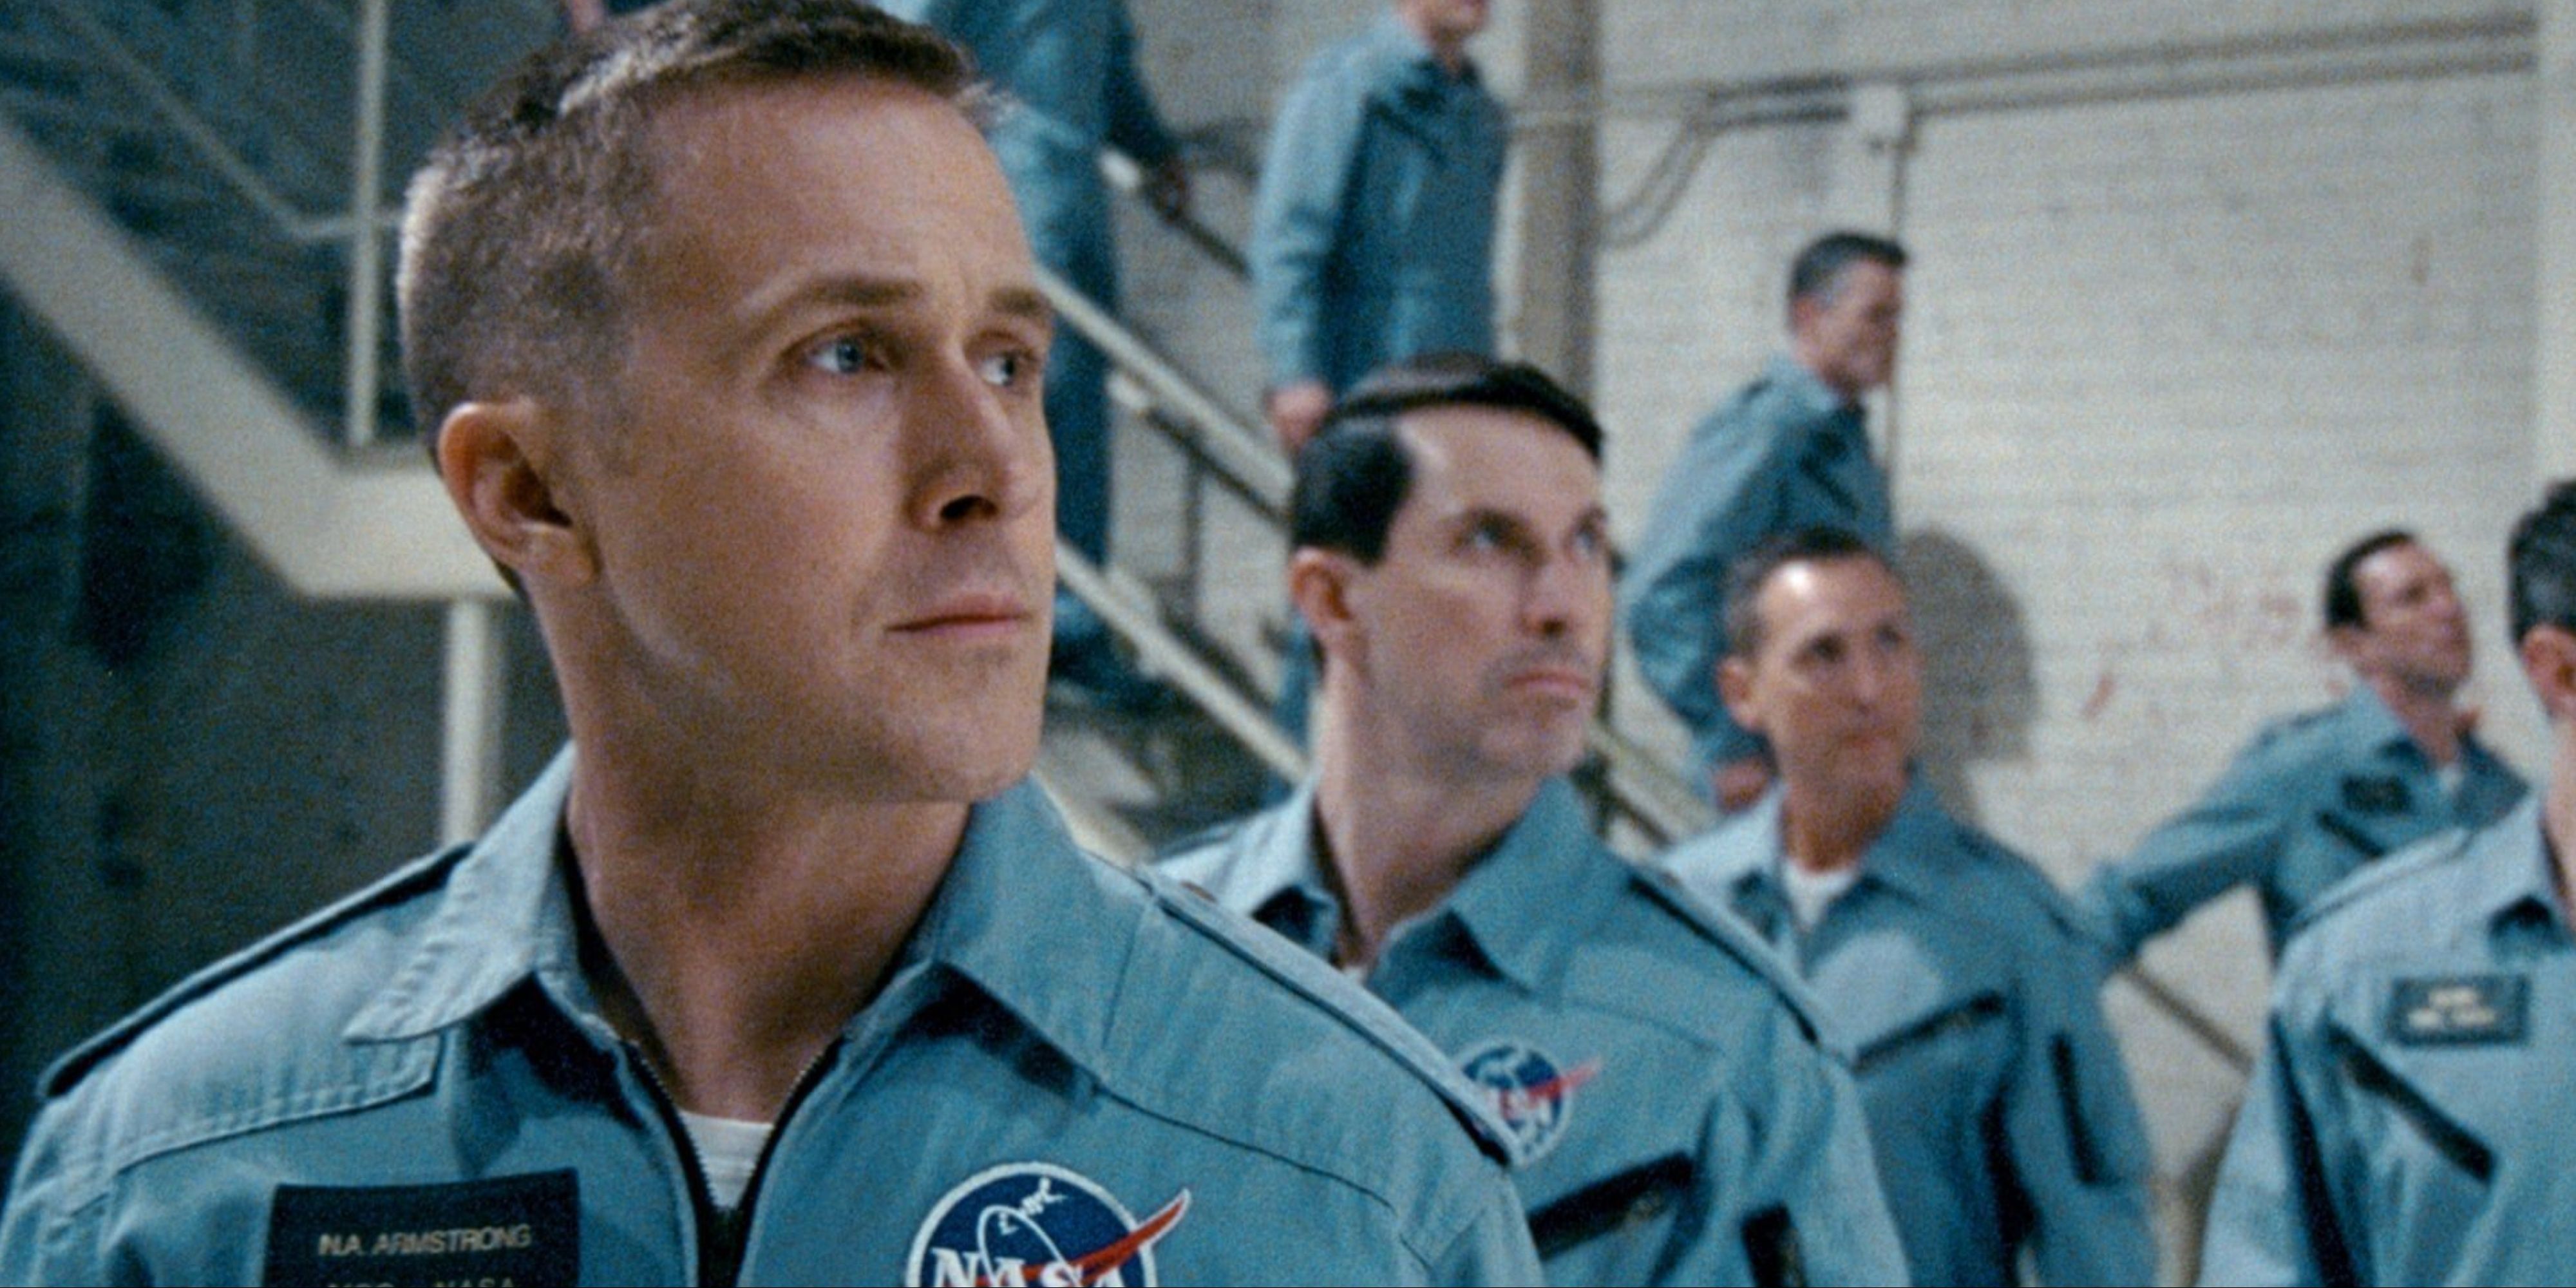 Ryan Gosling as Neil Armstrong training in First Man